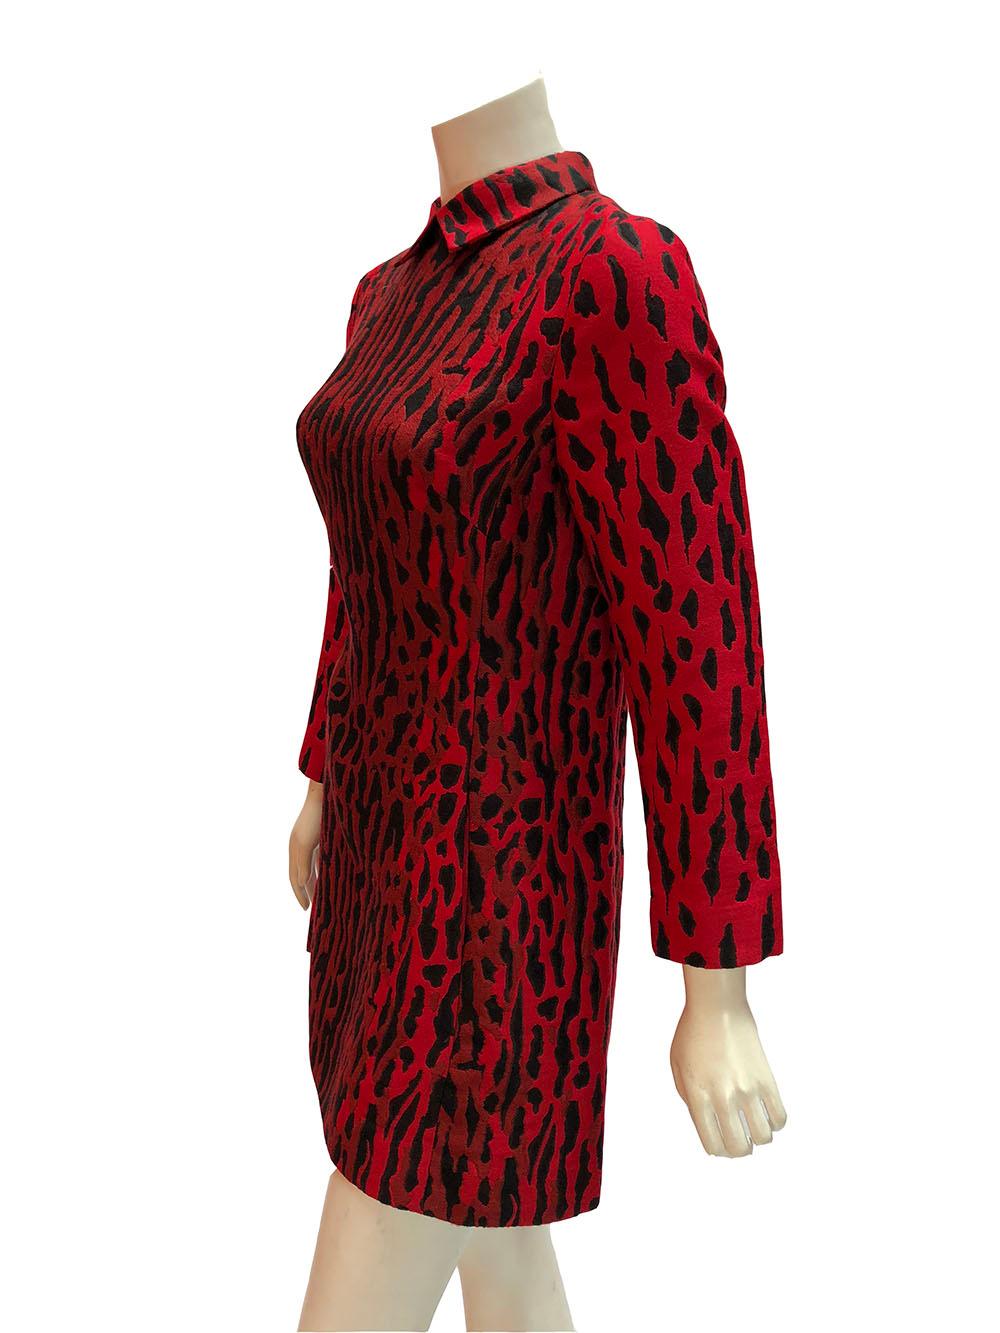 Valentino Red and Black Leopard Print Collared Shift Dress
Valentino classic collared mini dress. Black leopard print over red ombre. Long sleeves. Back zip closure. Fully lined in silk. Size 40. 

Est. Retail: $1,900+